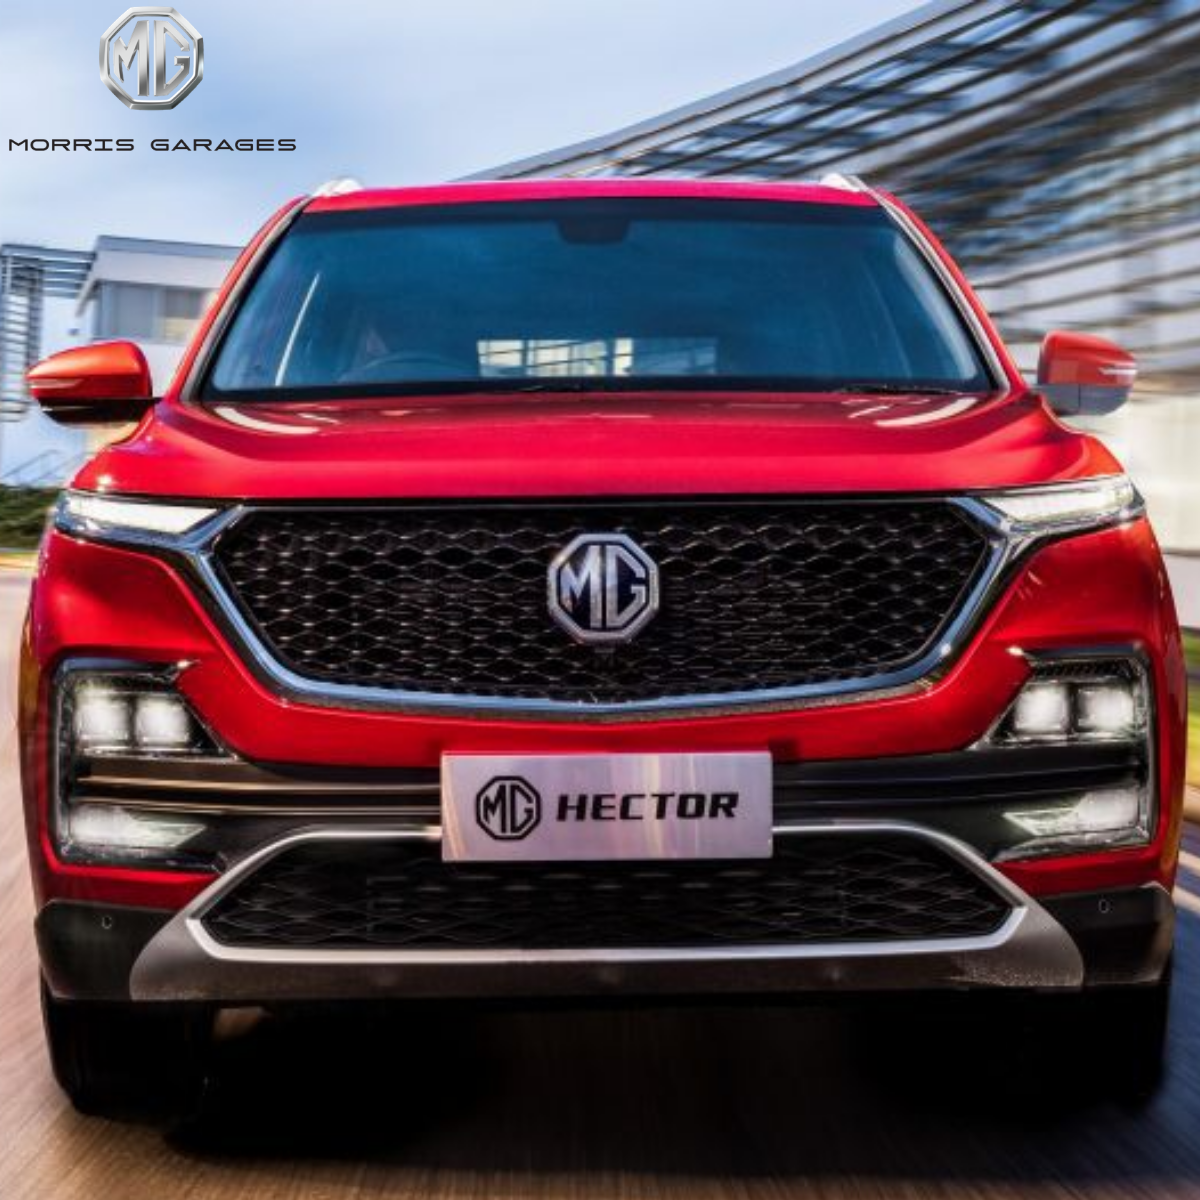 MG Hector SUV To Be Unveiled In India In May. Super cars, Hector, Pre wedding photohoot outdoor